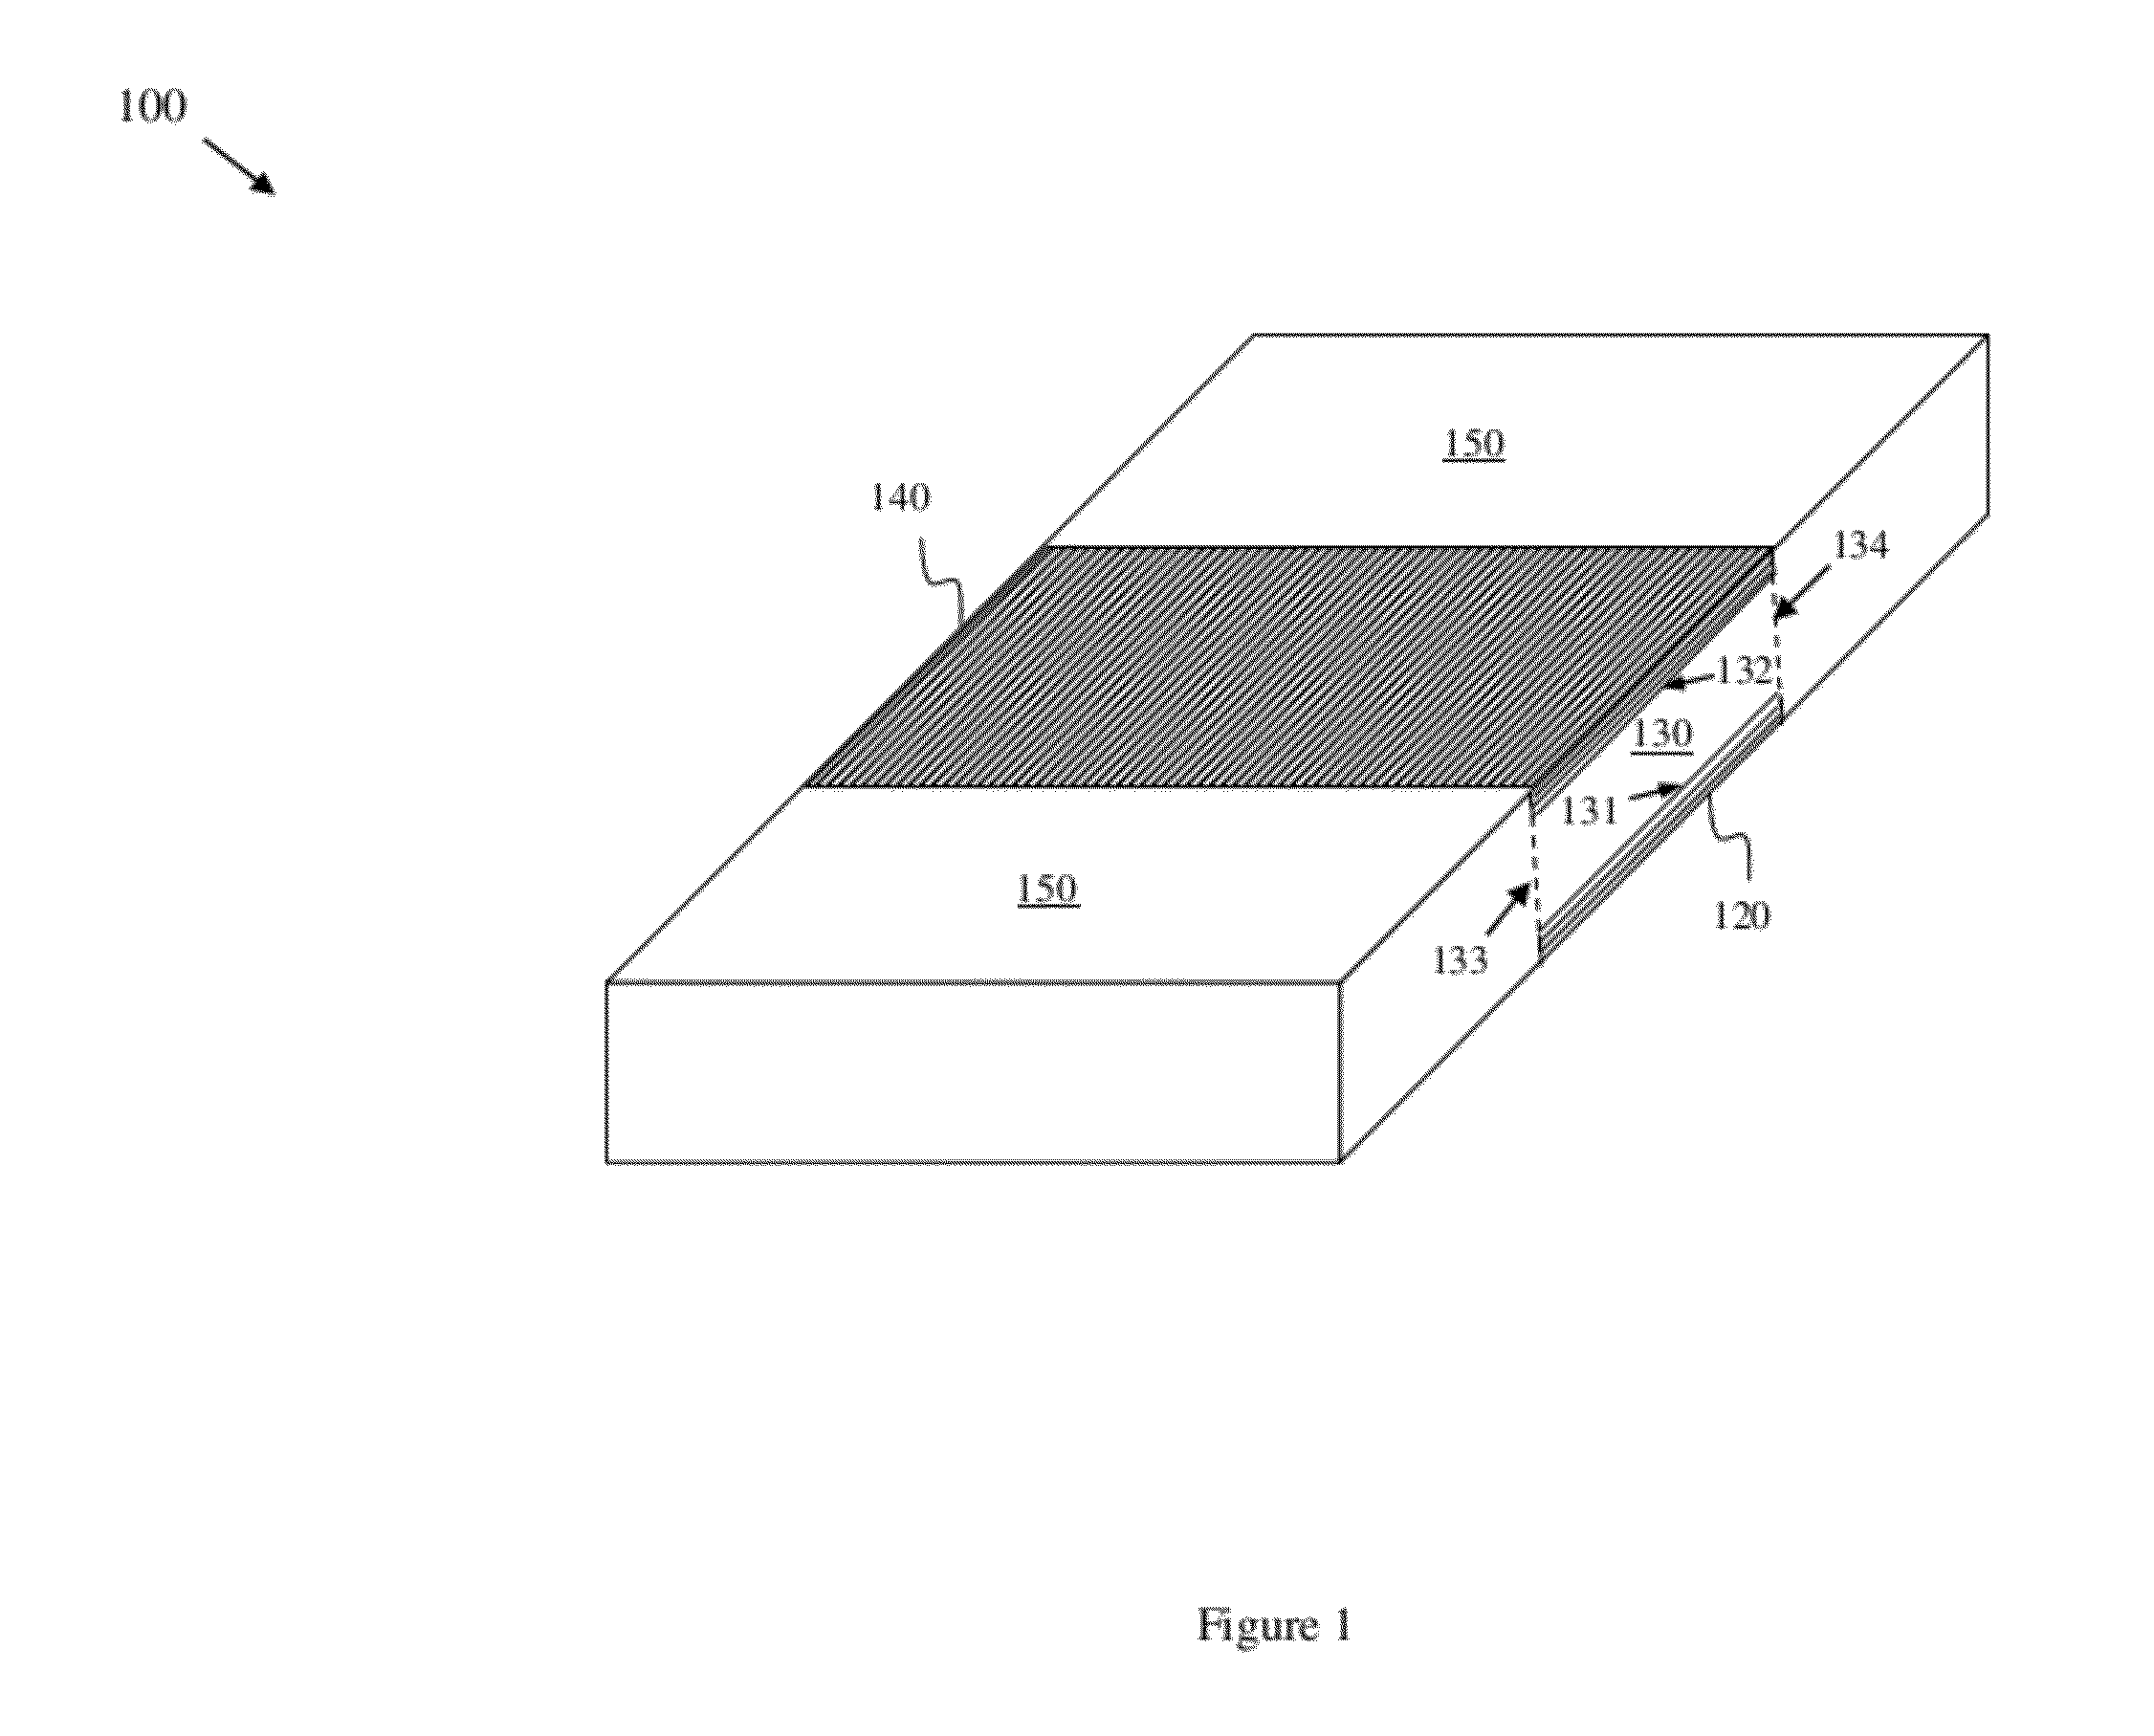 Junction field effect transistor structure with p-type silicon germanium or silicon germanium carbide gate(s) and method of forming the structure